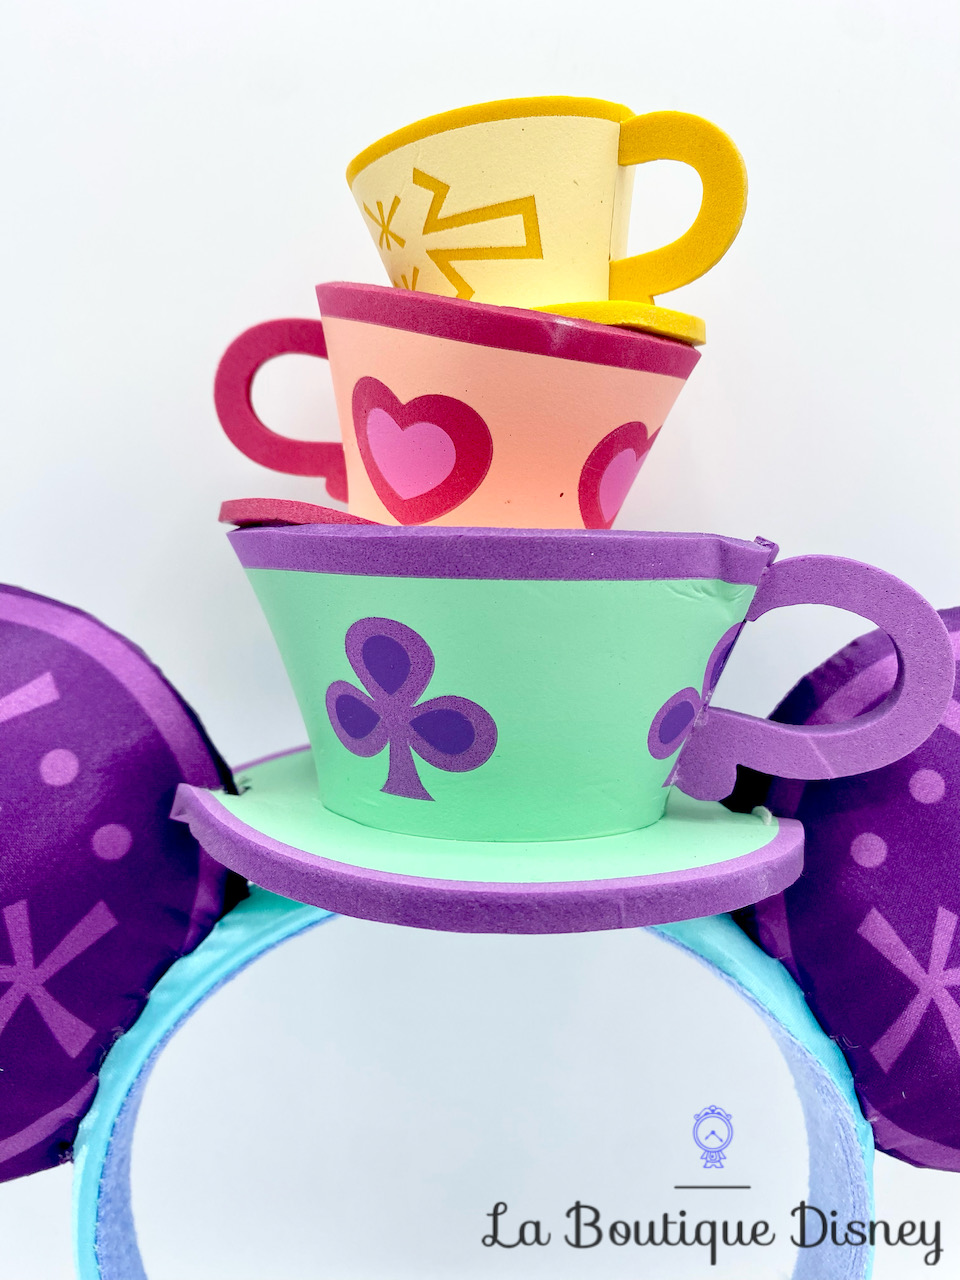 oreilles-ears-mickey-mouse-mad-tea-party-alice-the-main-attraction-disney-store-édition-limitée-serre-tete-2